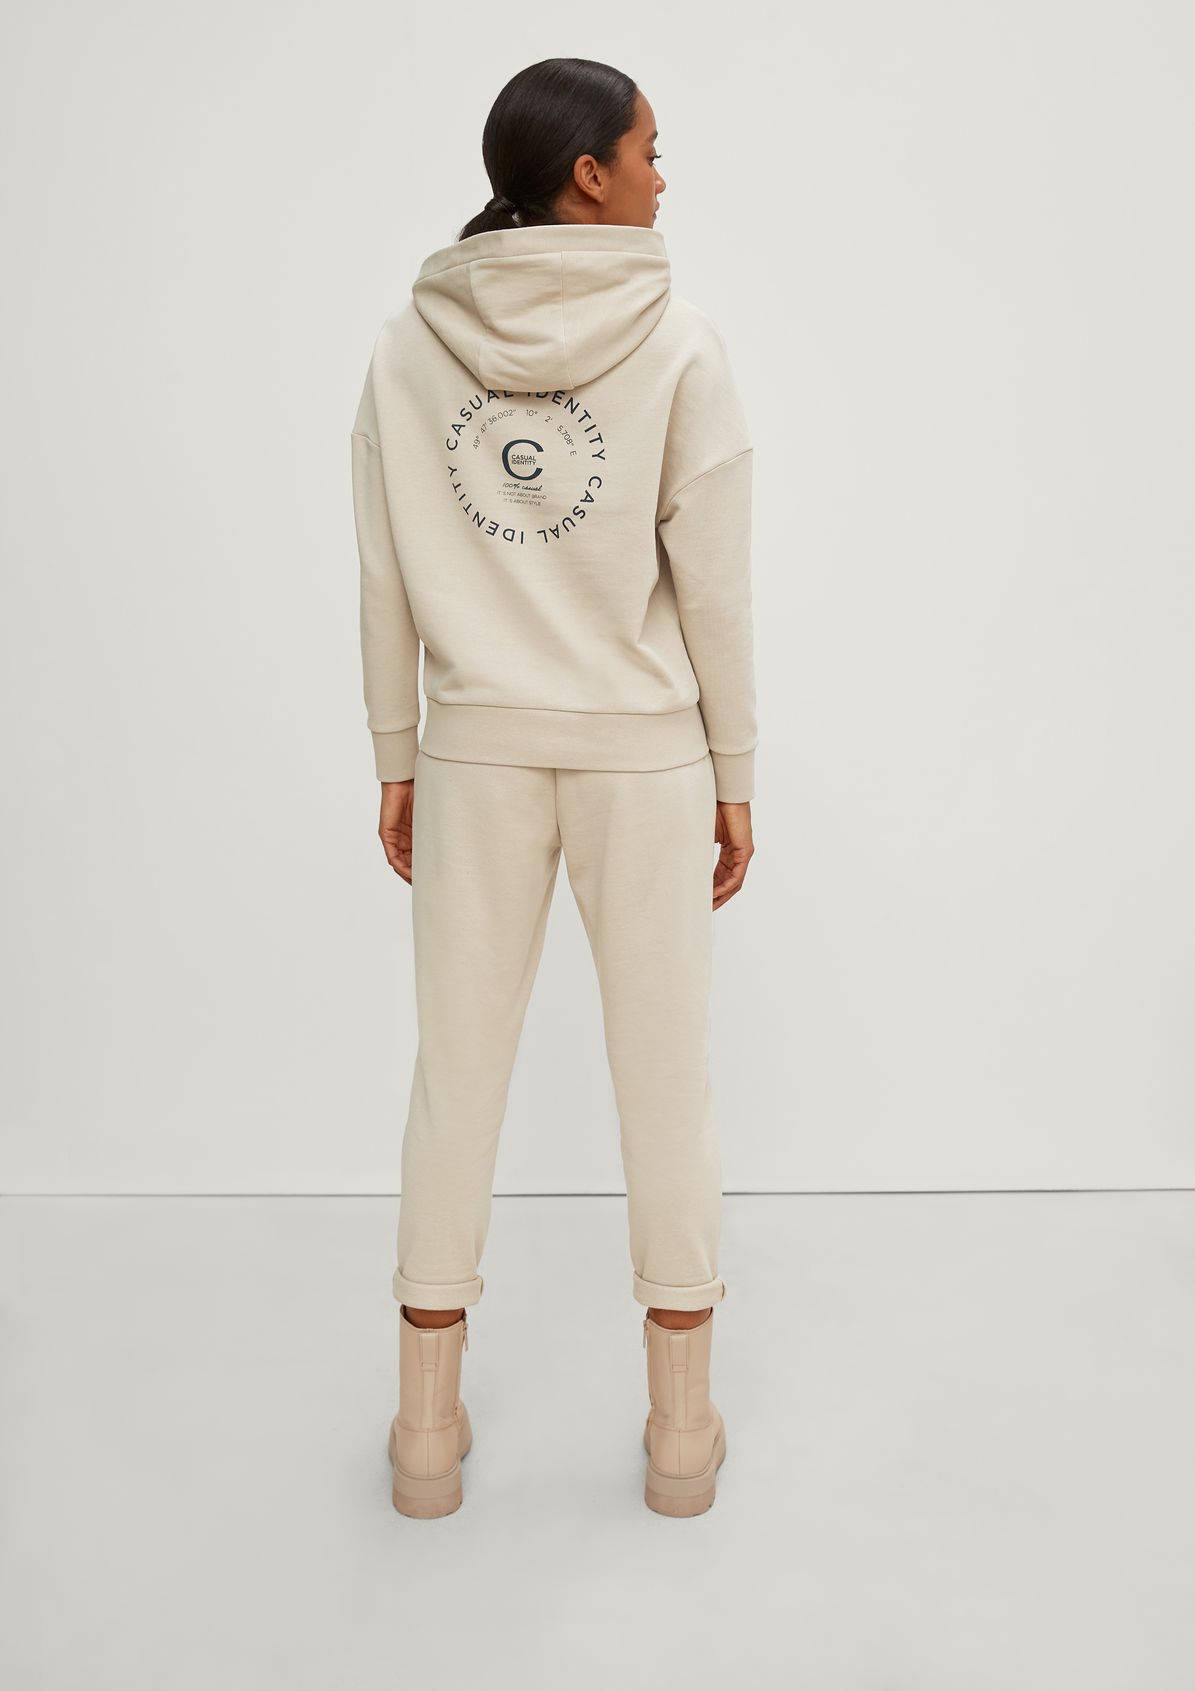 Loose hooded jumper from comma